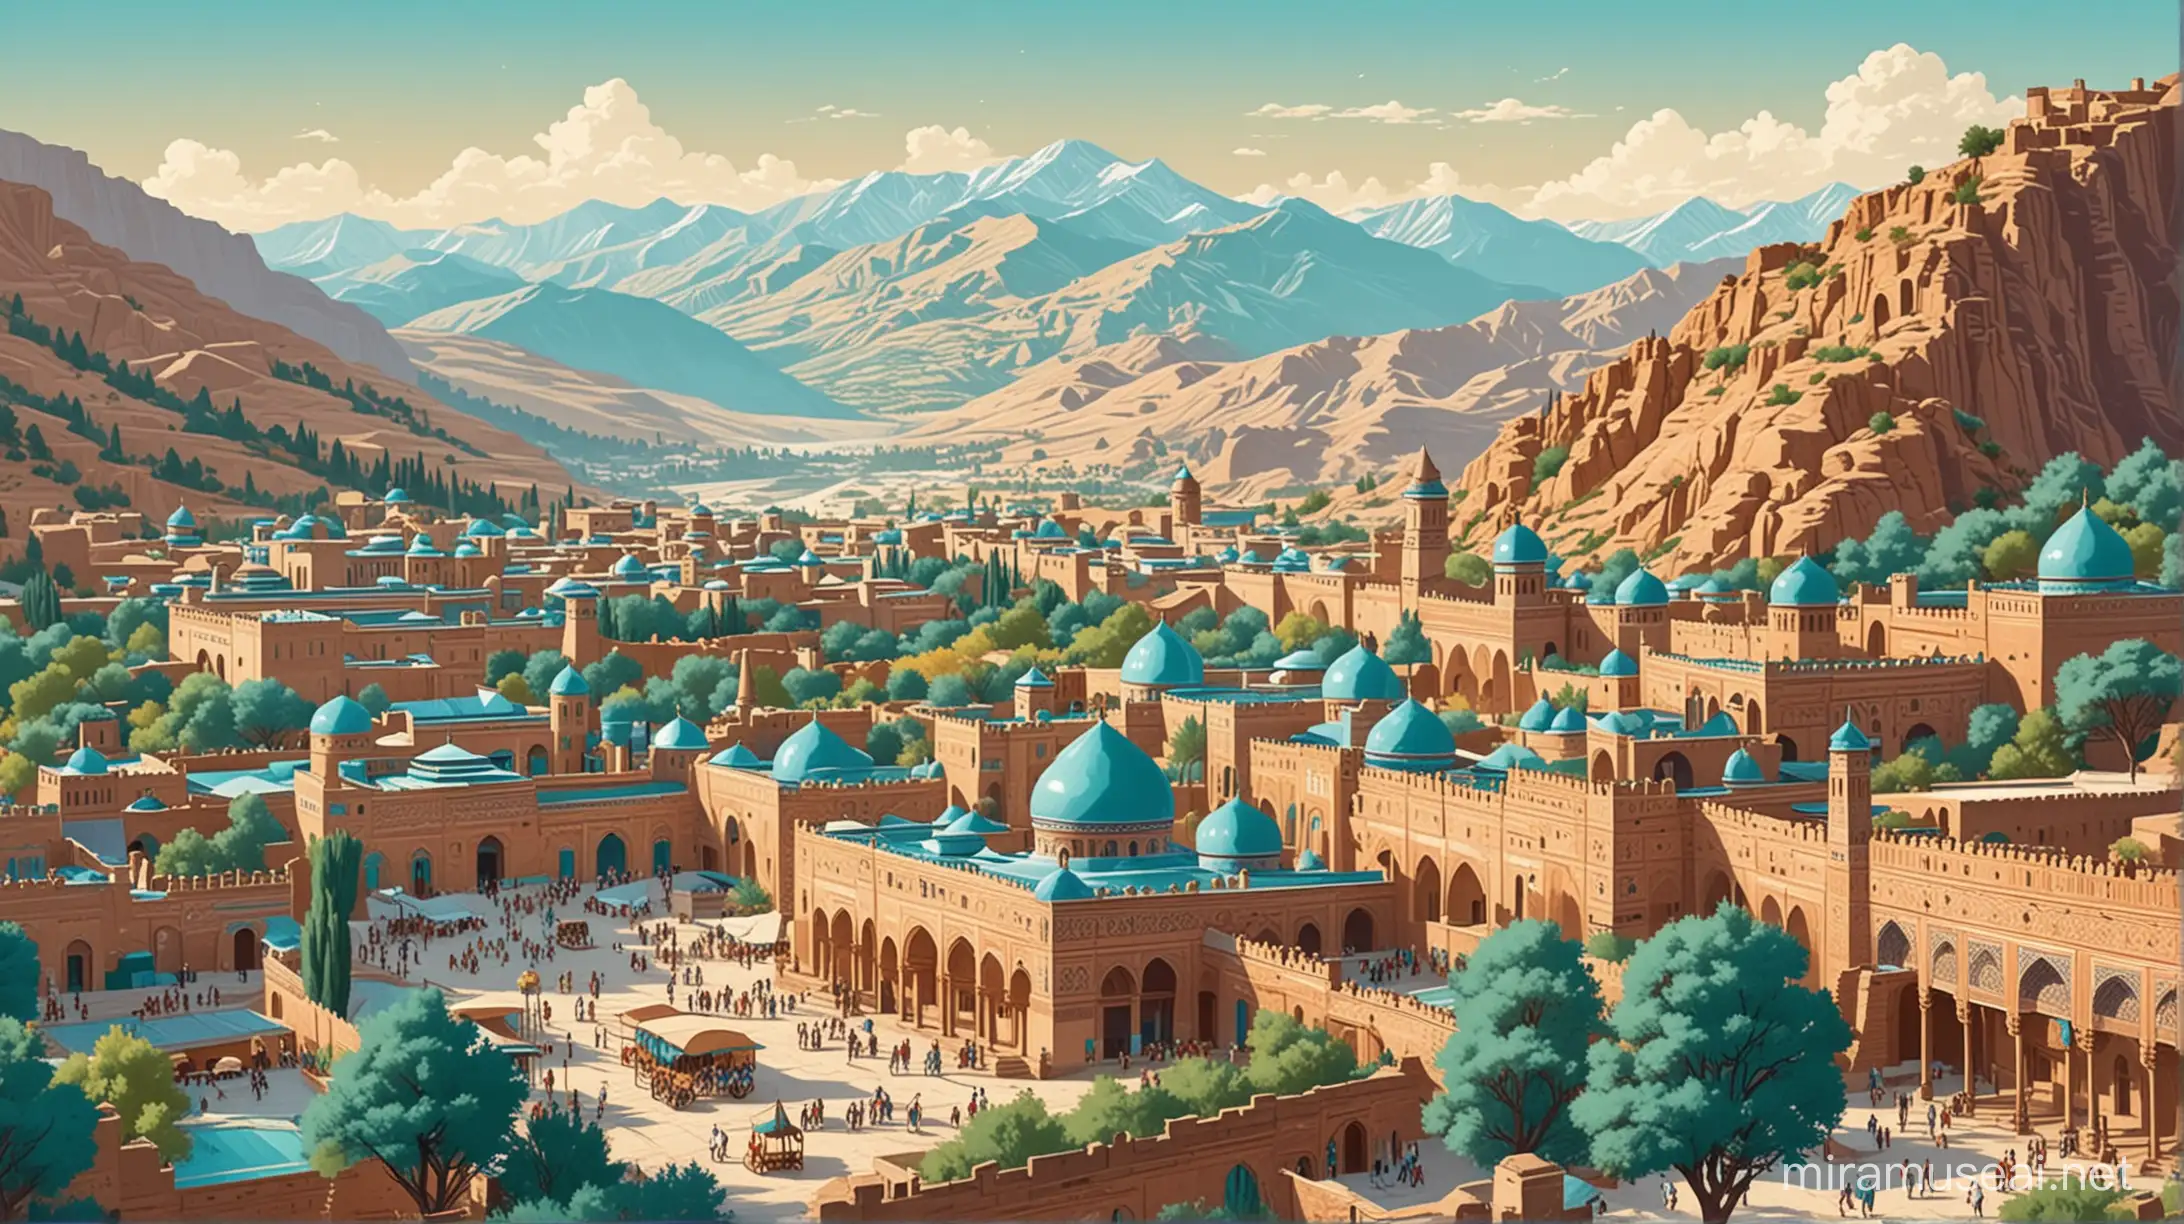 Mixed style of flat vector art and travel poster: recreation of ancient city of Samarkand in original state with turquoise palace and ancient Persian dwellings and an ancient Middle Eastern market and mountains in the background.